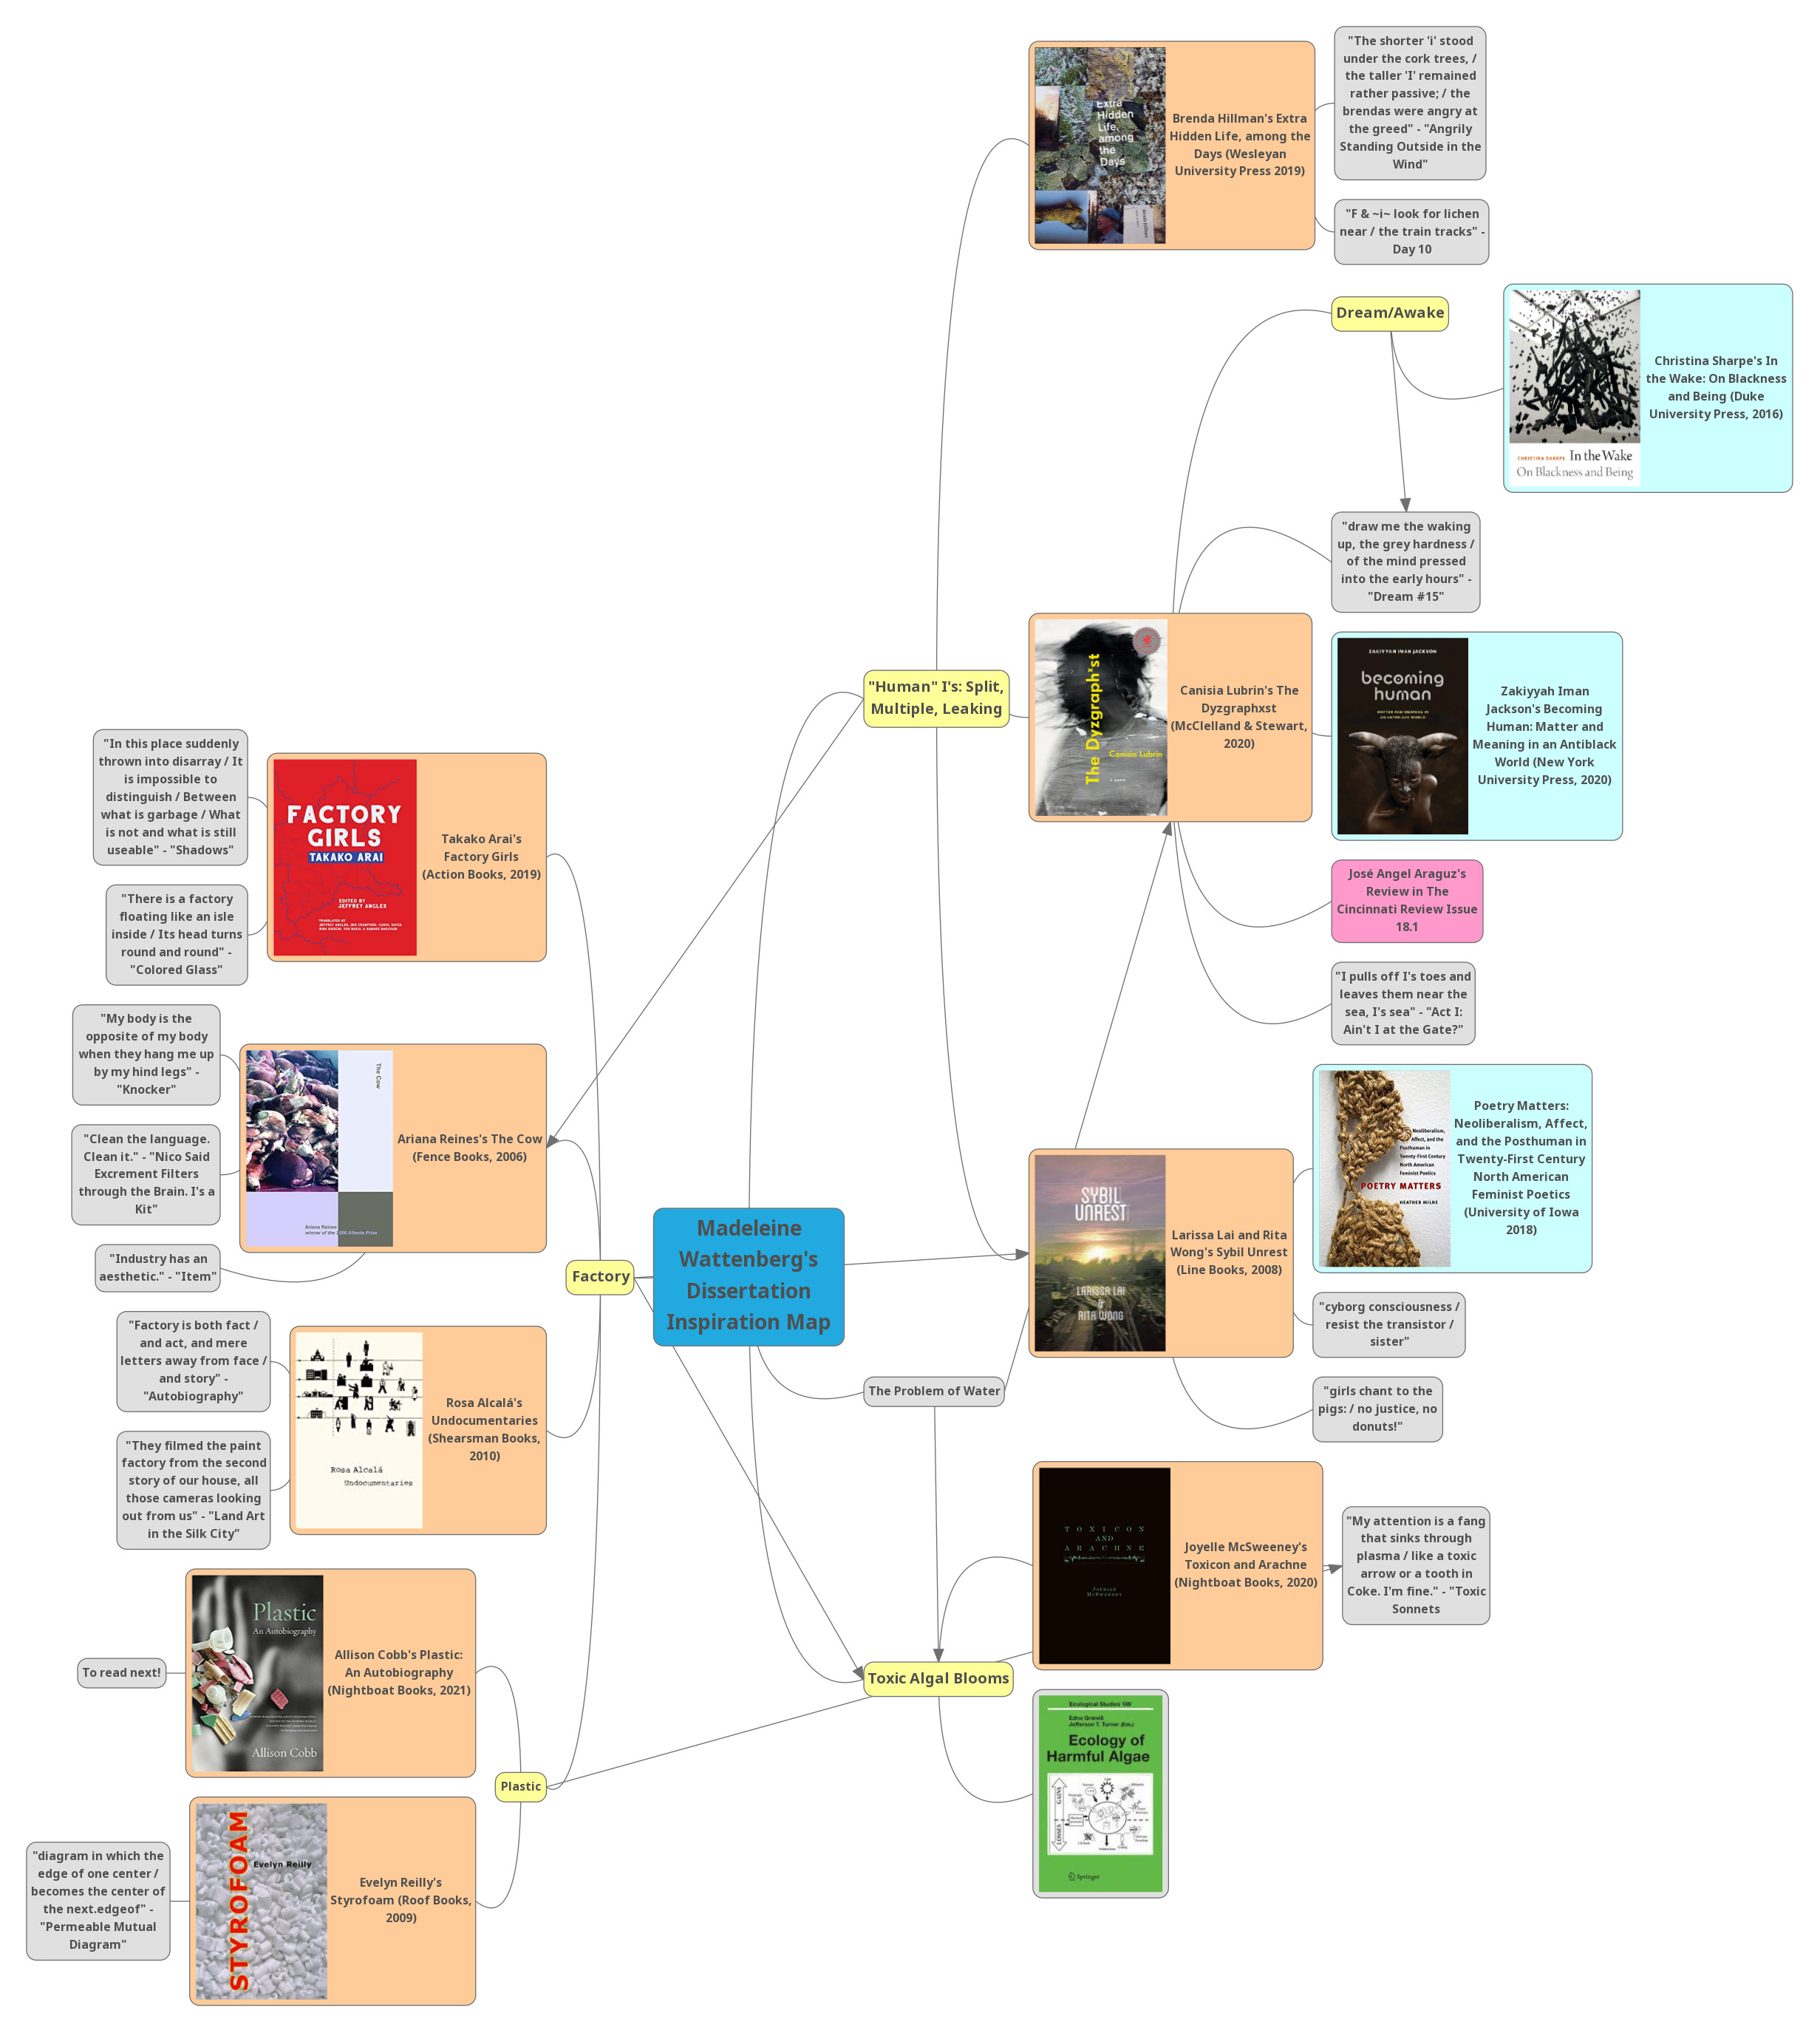 •	Madeleine Wattenberg’s Dissertation Inspiration Map
–	“Human” I’s: Split, Multiple, Leaking
•	Brenda Hillman’s Extra Hidden Life, among the Days (Wesleyan University Press 2019)
–	“The shorter ‘i’ stood under the cork trees, / the taller ‘I’ remained rather passive; / the brendas were angry at the greed” - “Angrily Standing Outside in the Wind”
–	“F & i look for lichen near / the train tracks” - Day 10
•	Canisia Lubrin’s The Dysgraphxst (McClelland & Stewart, 2020)
–	Dream/Awake
•	Christina Sharpe’s In the Wake: On Blackness and Being (Duke University Press, 2016)
–	“draw me the waking up, the grey hardness / of the mind pressed into the early hours” - “Dream #15”
–	Zakiyyah Iman Jackson’s Becoming Human: Matter and Meaning in an Antiblack World (New York University Press, 2020)
–	José Angel Araguz’s Review in The Cincinnati Review Issue 18.1
–	“I pulls off I’s toes and leaves them near the sea, I’s sea” - “Act I: Ain’t I at the Gate?”
•	Larissa Lai and Rita Wong’s Sybil Unrest (Line Books, 2008)
–	Poetry Matters: Neoliberalism, Affect, and the Posthuman in Twenty-First Century North American Feminist Poetics (University of Iowa 2018)
–	“cyborg consciousness / resist the transistor / sister”
–	“girls chant to the pigs: / no justice, no donuts!”
–	The Problem of Water
–	Toxic Algal Blooms
•	Joyelle McSweeney’s Toxicon and Arachne (Nightboat Books, 2020)
 	
–	“My attention is a fang that sinks through plasma / like a toxic arrow or a tooth in Coke. I’m fine.” - "Toxic Sonnets
–	Factory
•	Takako Arai’s Factory Girls (Action Books, 2019)
–	“In this place suddenly thrown into disarray / It is impossible to distinguish / Between what is garbage / What is not and what is still useable” - “Shadows”
–	“There is a factory floating like an isle inside / Its head turns round and round” - “Colored Glass”
•	Ariana Reine’s The Cow (Fence Books, 2006)
–	“My body is the opposite of my body when they hang me up by my hind legs” - “Knocker”
–	“Clean the language. Clean it.” - “Nico Said Excrement Filters through the Brain. I’s a Kit”
–	“Industry has an aesthetic.” - “Item”
•	Rosa Alcalá’s Undocumentaries (Shearsman Books, 2010)
–	“Factory is both fact / and act, and mere letters away from face / and story” - “Autobiography”
–	“They filmed the paint factory from the second story of our house, all those cameras looking out from us” - “Land Art in the Silk City”
•	Plastic
–	Allison Cobb’s Plastic: An Autobiography (Nightboat Books, 2021)
•	To read next!
–	Evelyn Reilly’s Styrofoam (Roof Books, 2009)
•	“diagram in which the edge of one center / becomes the center of the next.edgeof” - “Permeable Mutual Diagram”
